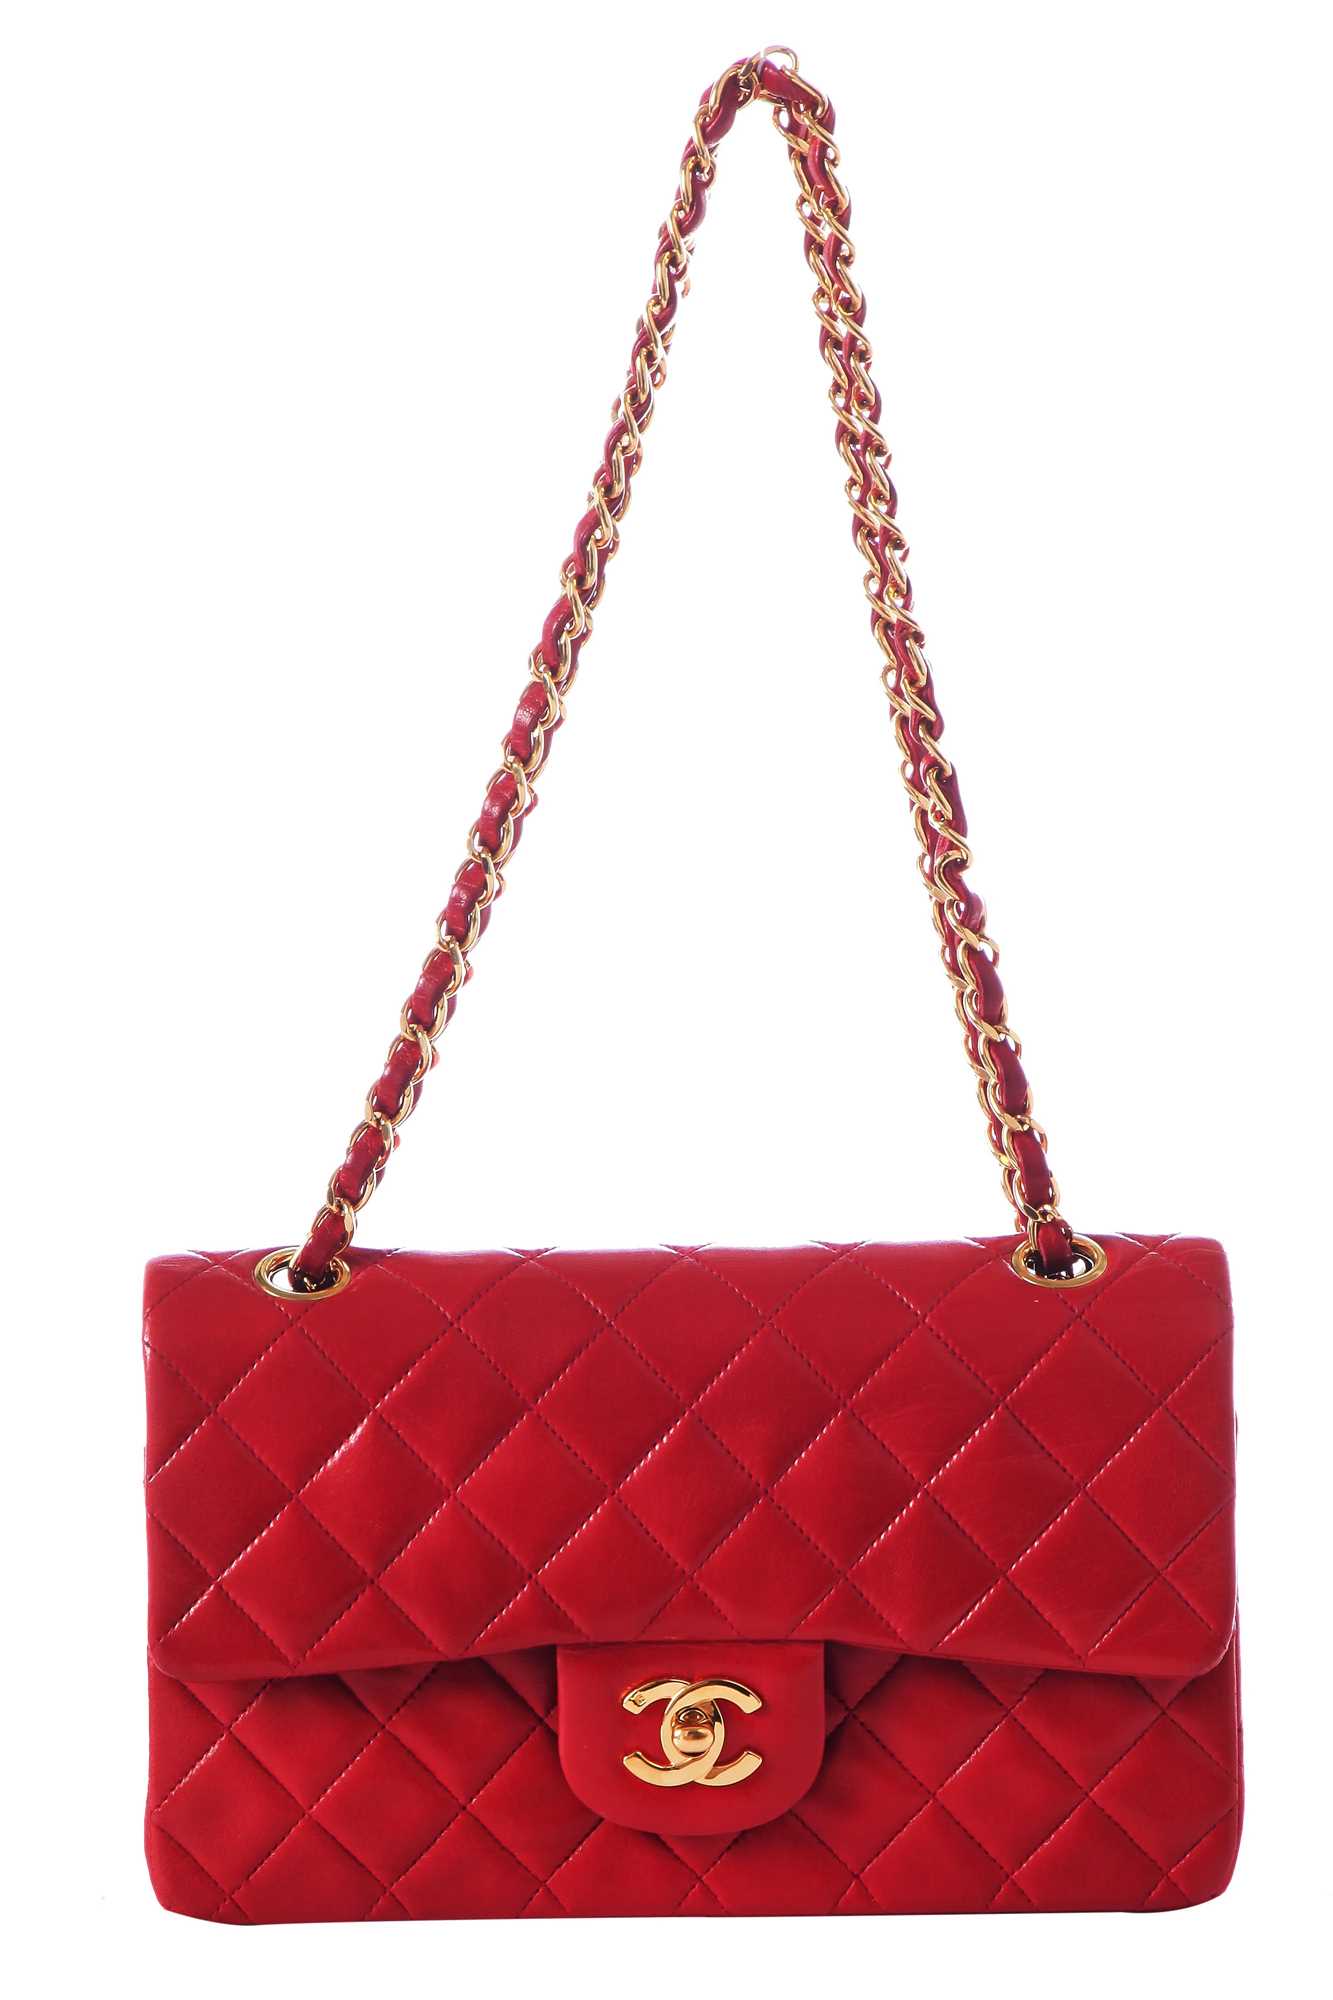 Lot 2 - A Chanel quilted red lambskin leather classic double-flap bag, 1991-94